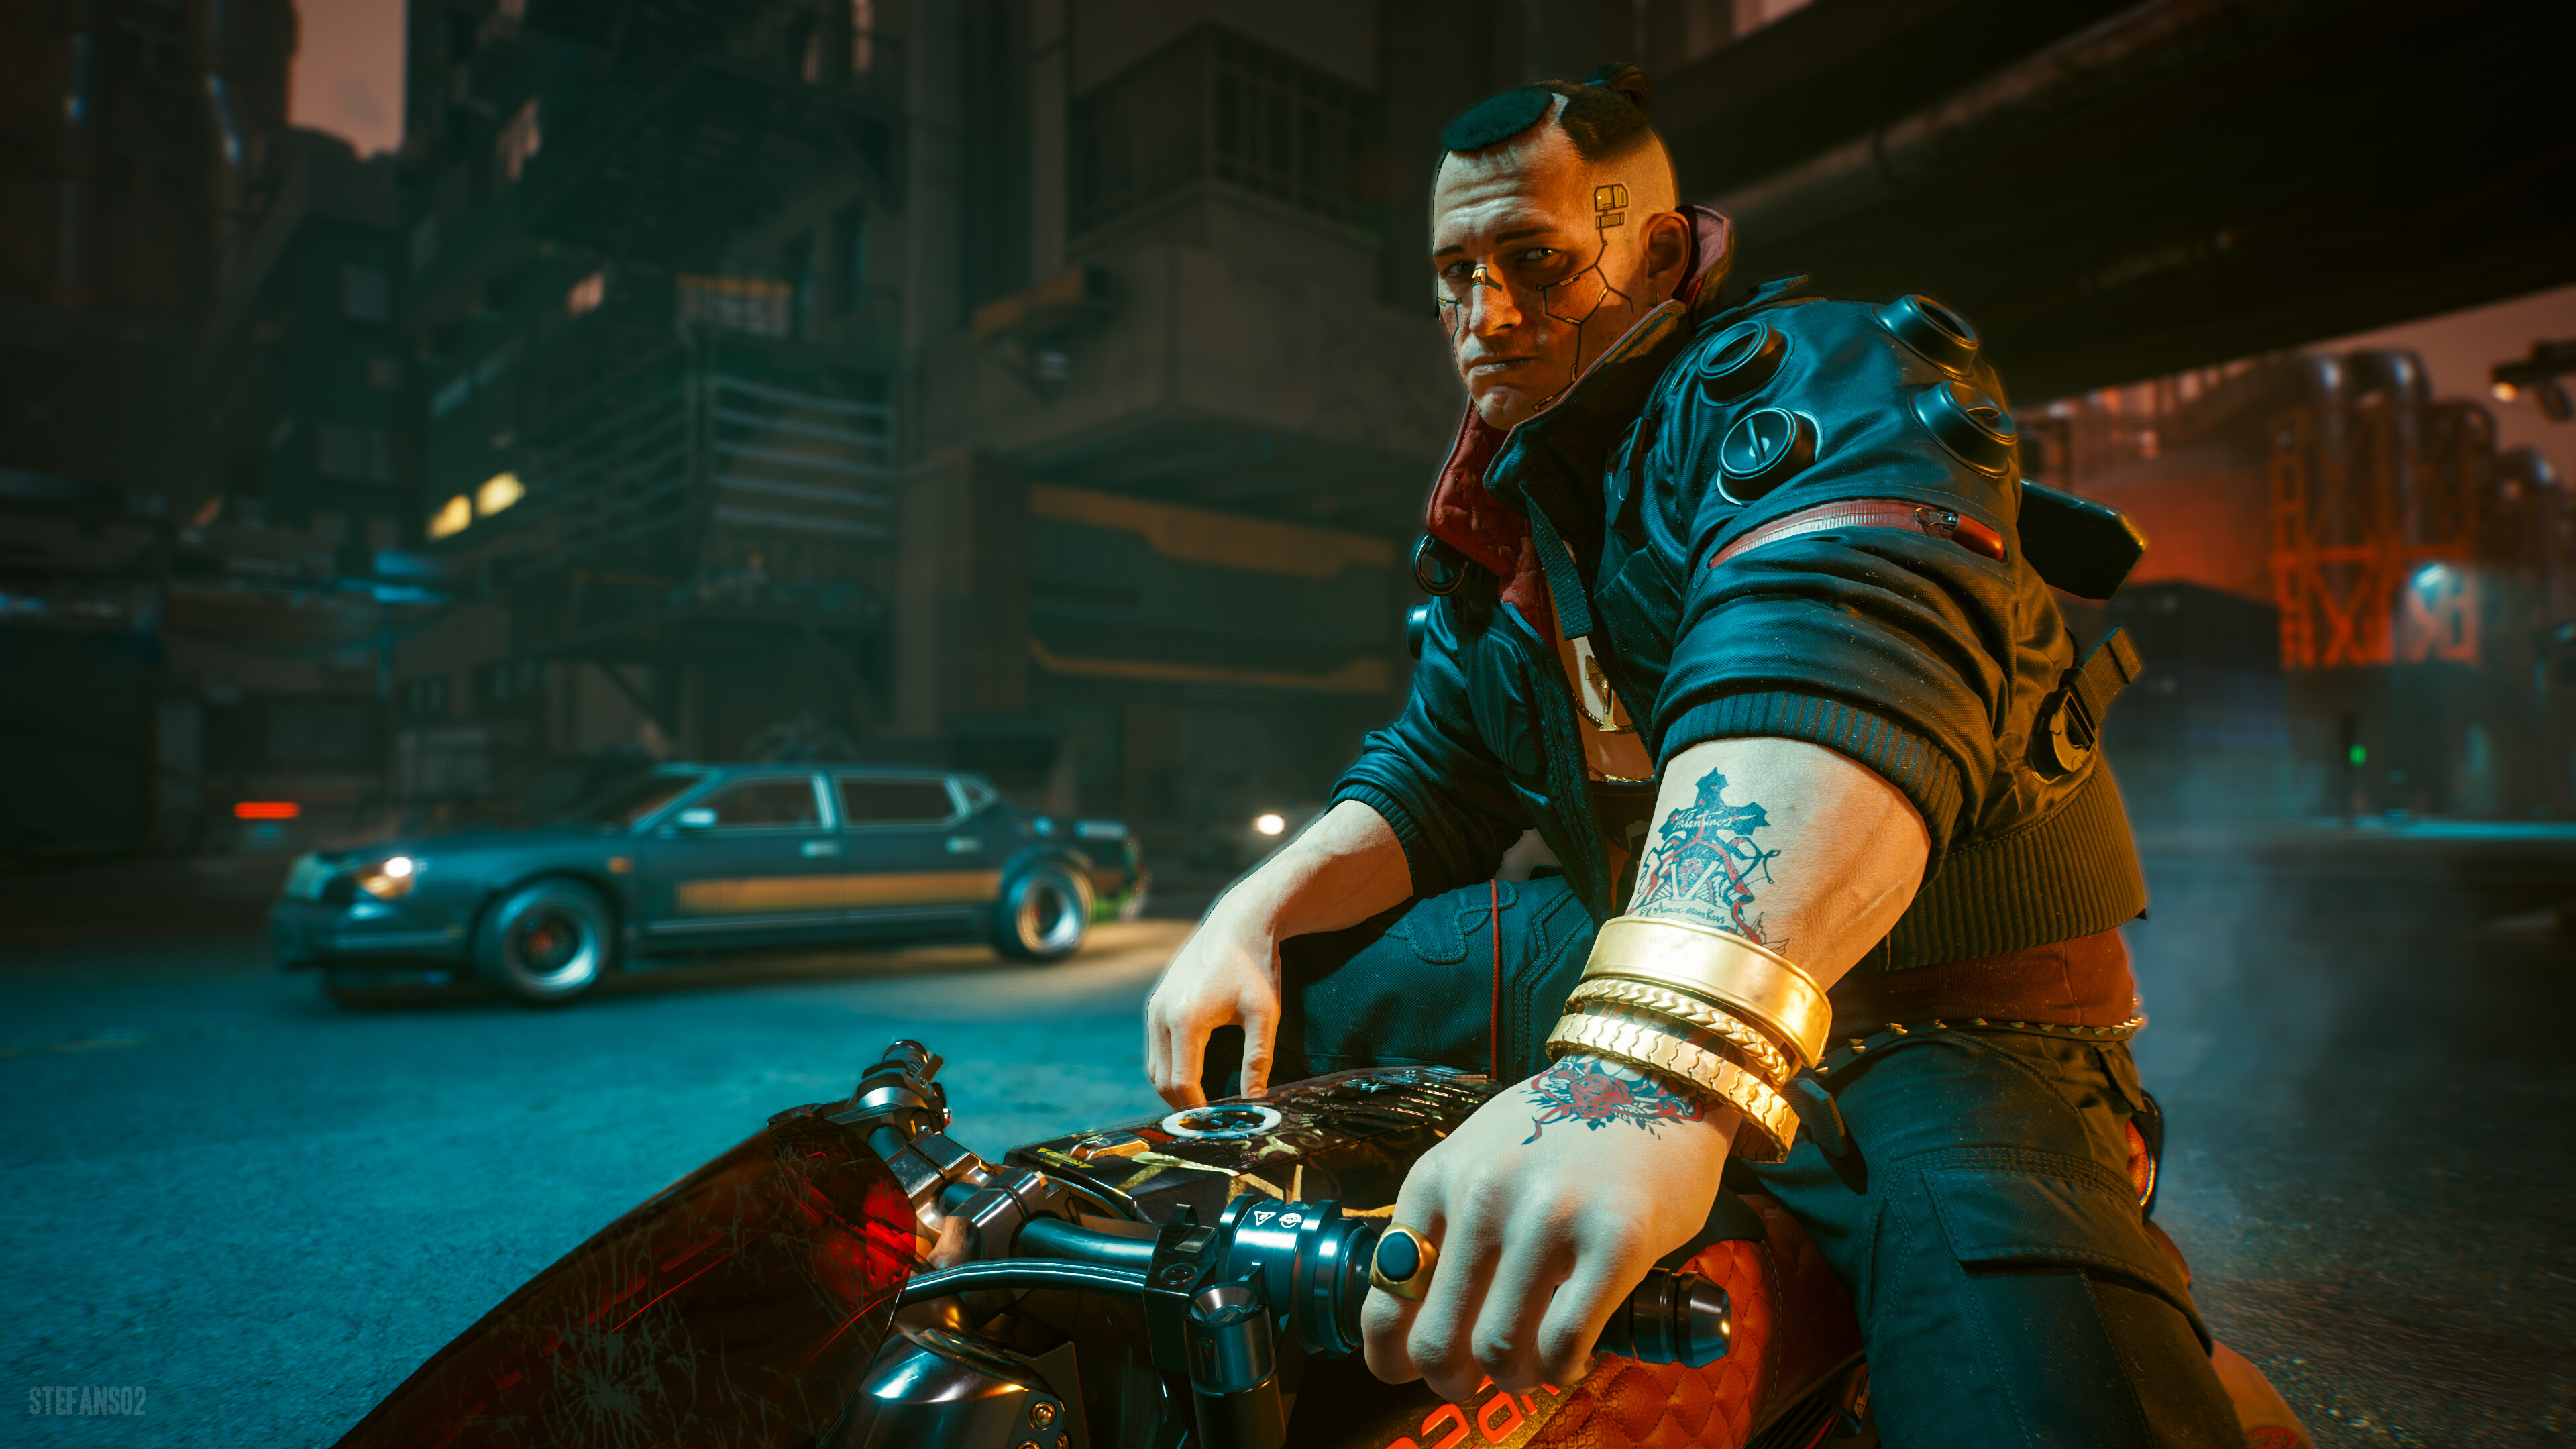 Cyberpunk 2077: Jackie Welles, A merc from Heywood who teamed up with V to become legends of Night City. 3840x2160 4K Wallpaper.